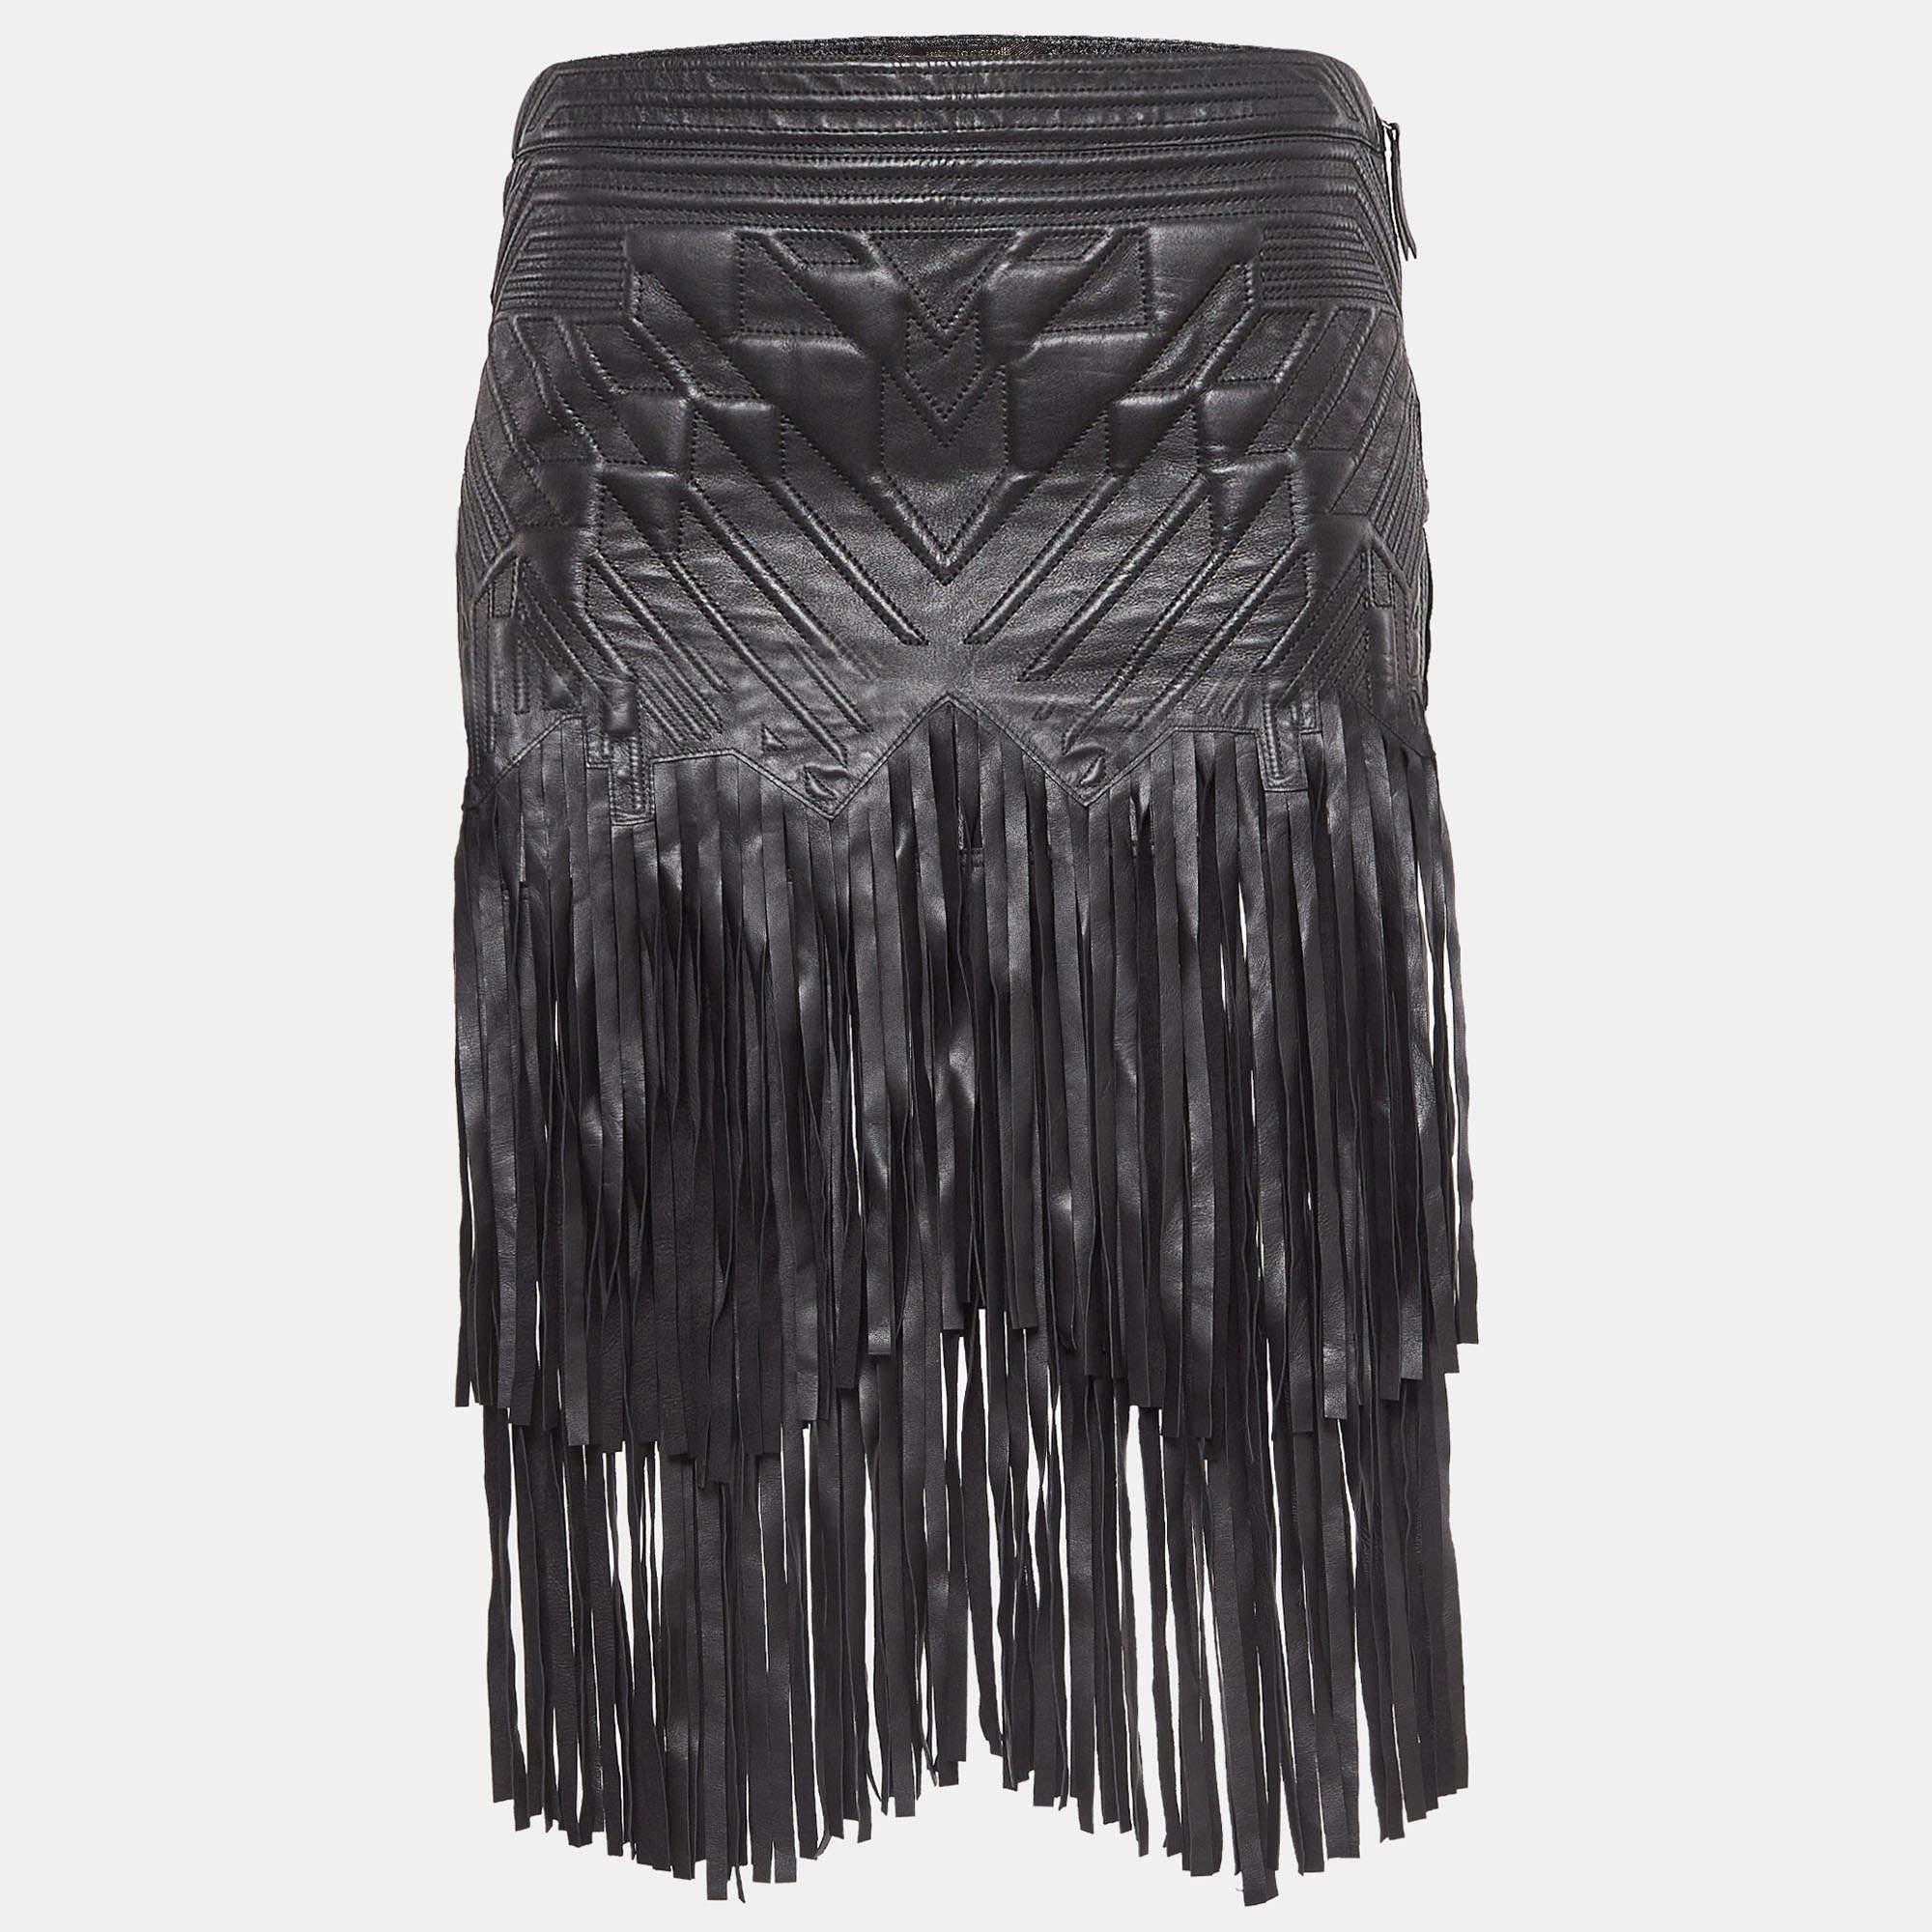 Elevate your wardrobe with this Roberto Cavalli leather skirt. It is beautifully tailored and detailed with embossing, zip closure, and fringes that sway with your every move.

